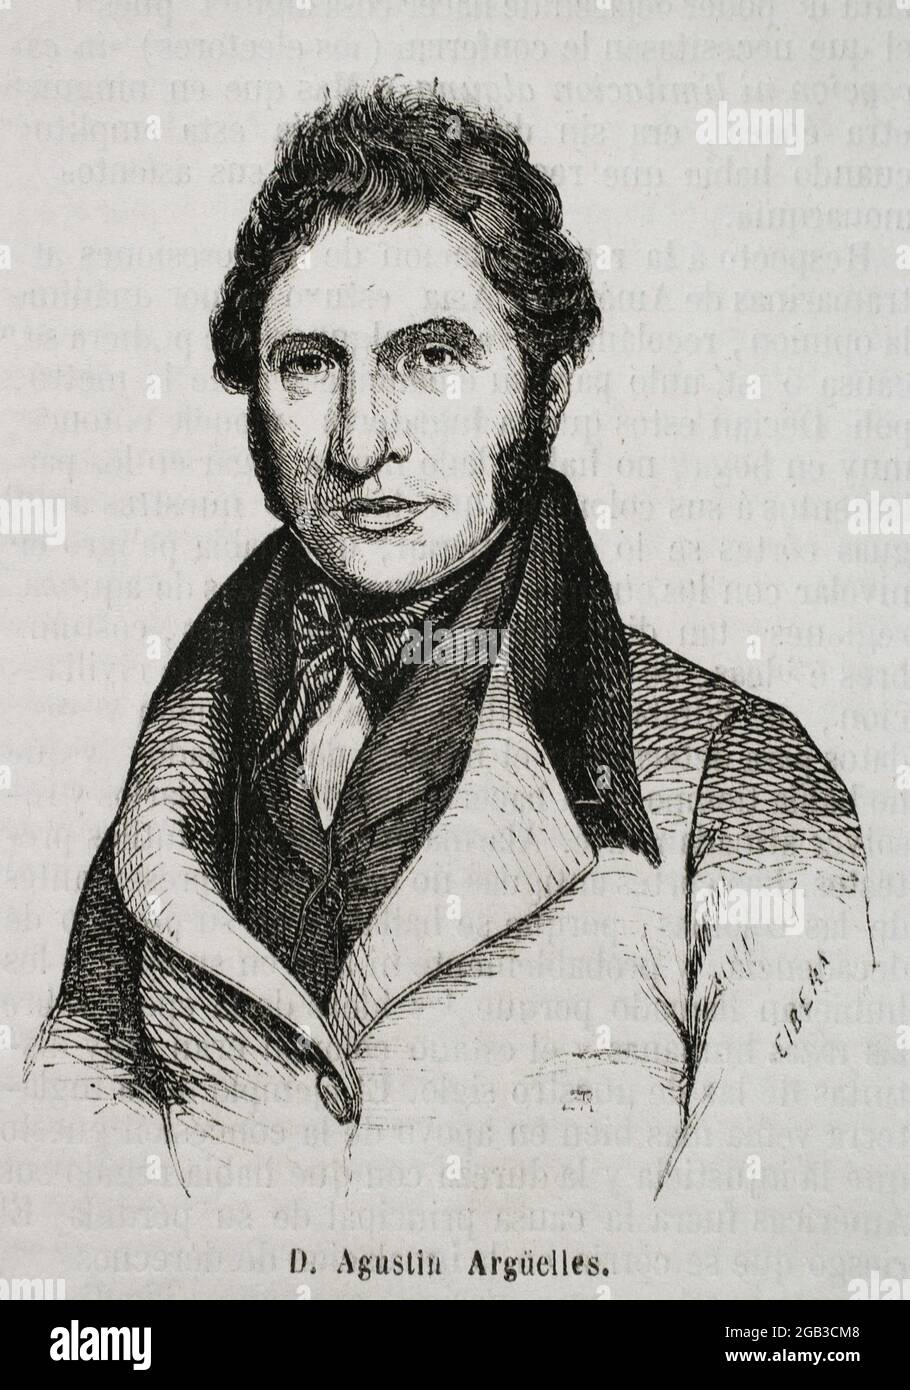 Agustín José Argüelles Alvarez (1776-1844). Known as 'El Divino'. Spanish liberal politician, diplomat, minister and president of the Congress of Deputies in 1841. He was tutor to Queen Isabella II. Portrait. Engraving by Cibera. Historia General de España by Father Mariana. Madrid, 1853. Author: Ildefonso Cibera. Spanish illustrator and xylographer of the second half of the 19th century. Stock Photo